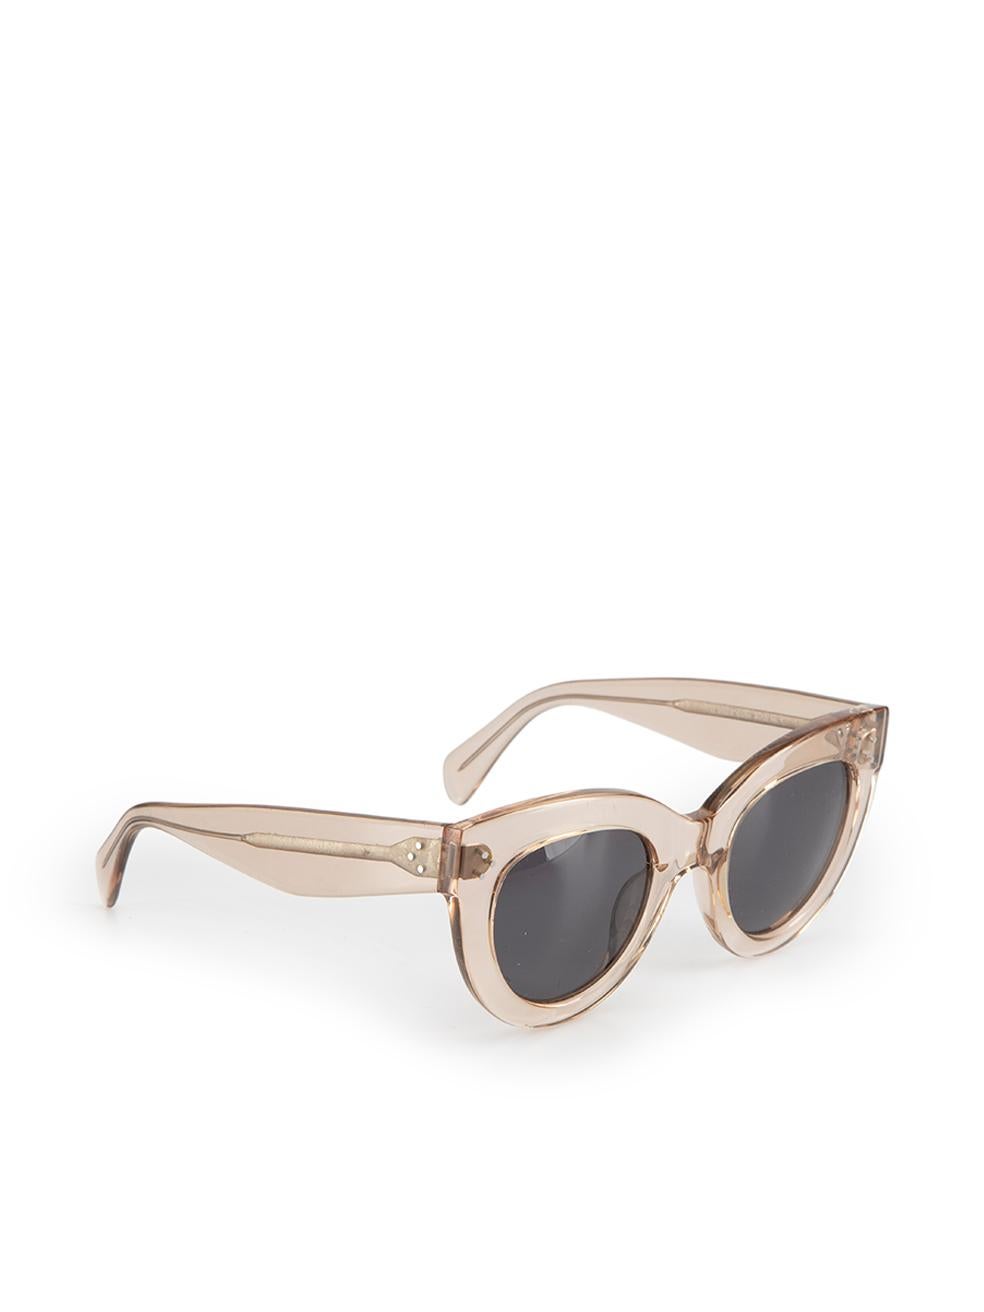 CONDITION is Good. Minor wear to sunglasses is evident. Light wear to the hardware within the acetate with discolouration on this used Celine designer resale item. These sunglasses come with original case with broken zip.



Details


See-through